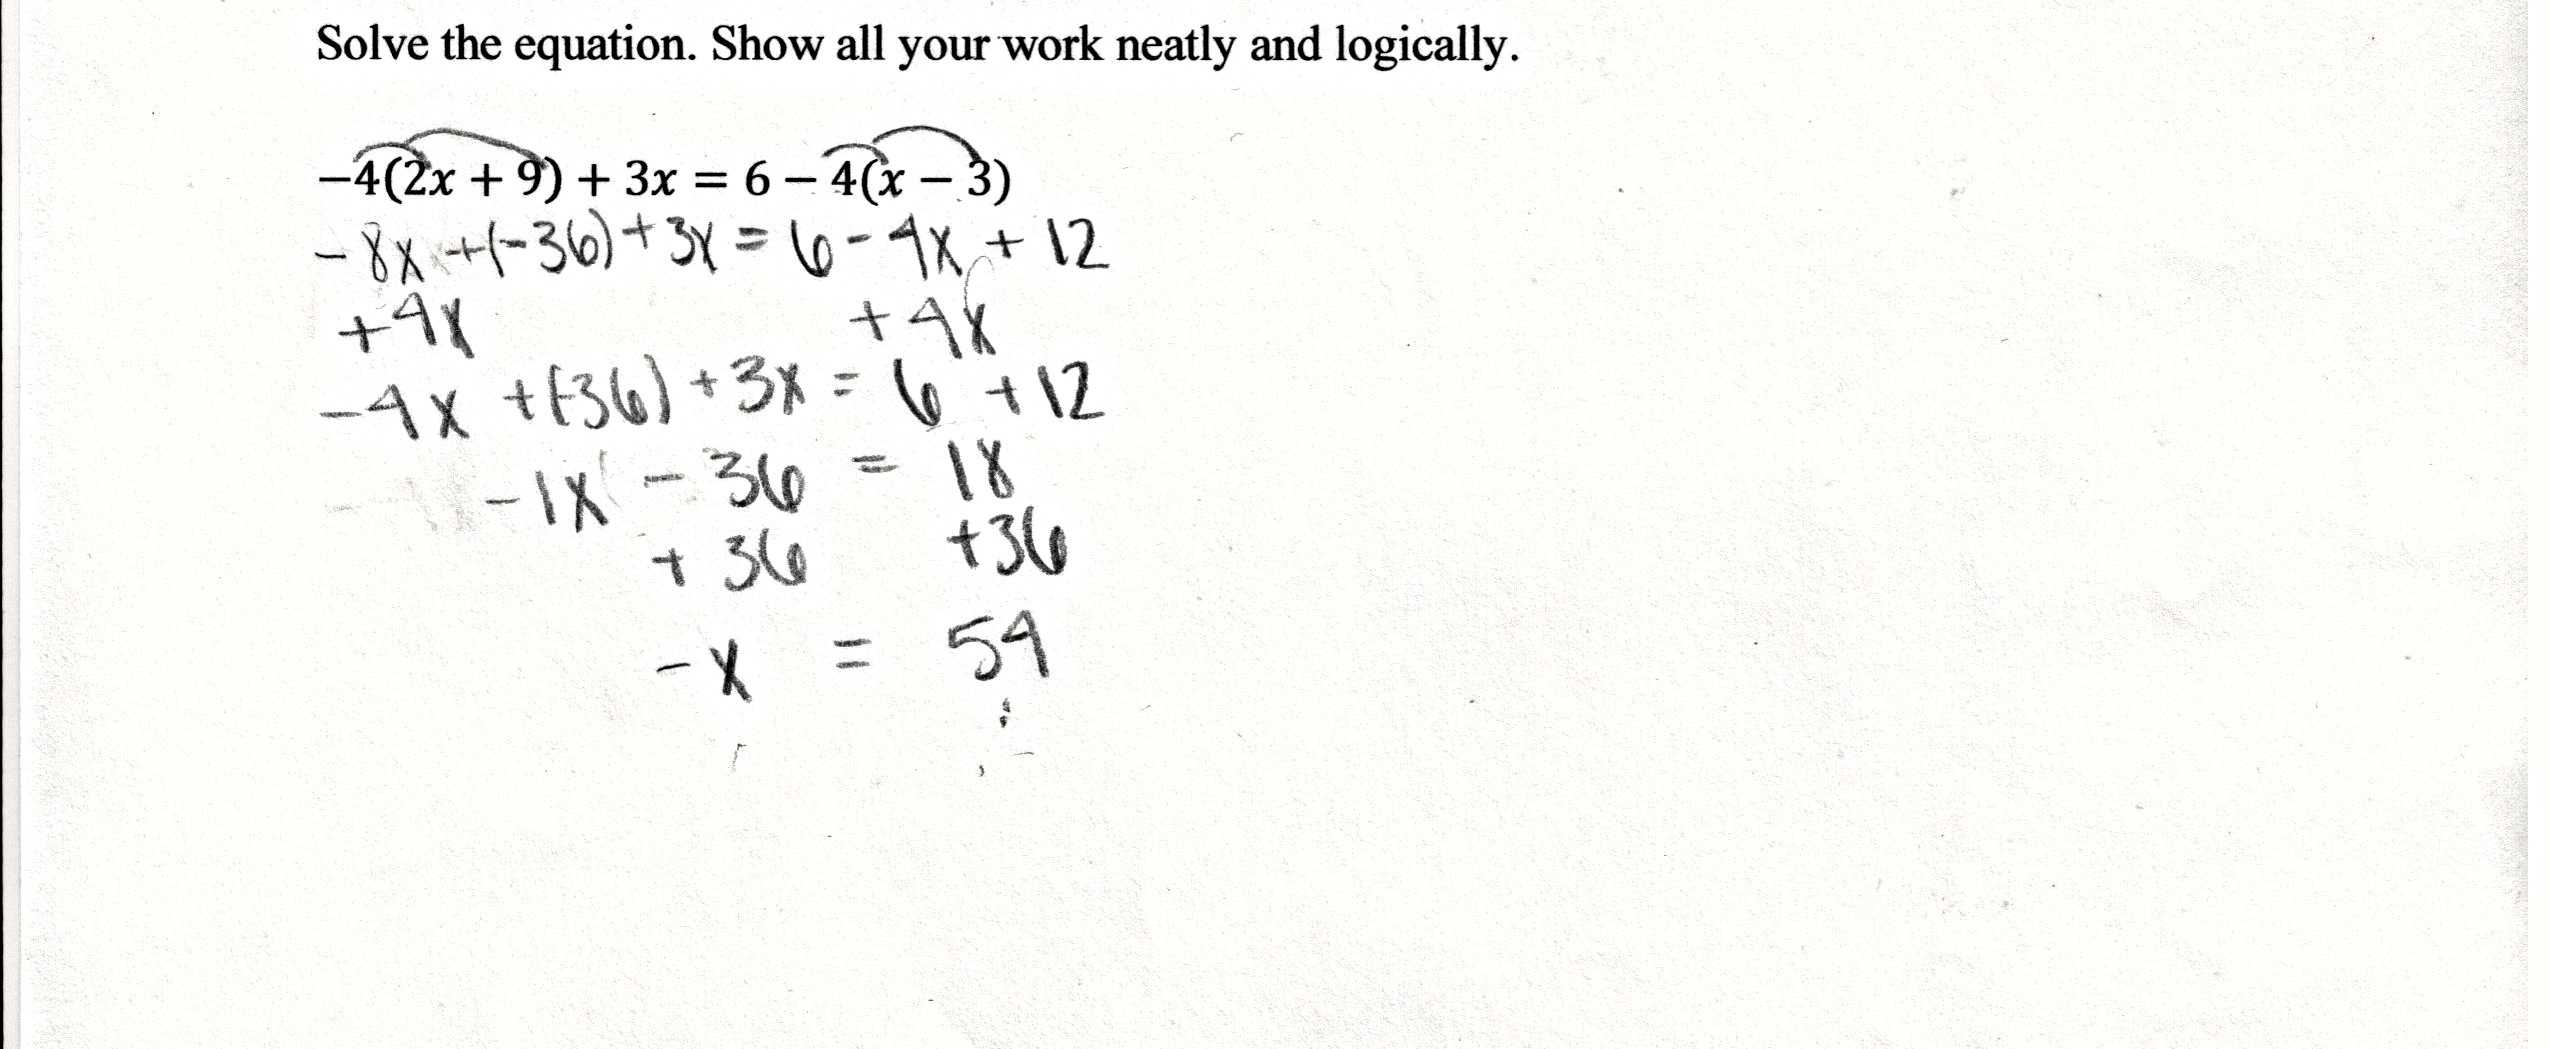 Solving Linear Inequalities Worksheet Also Math Worksheets Equations with Variables Both Sides